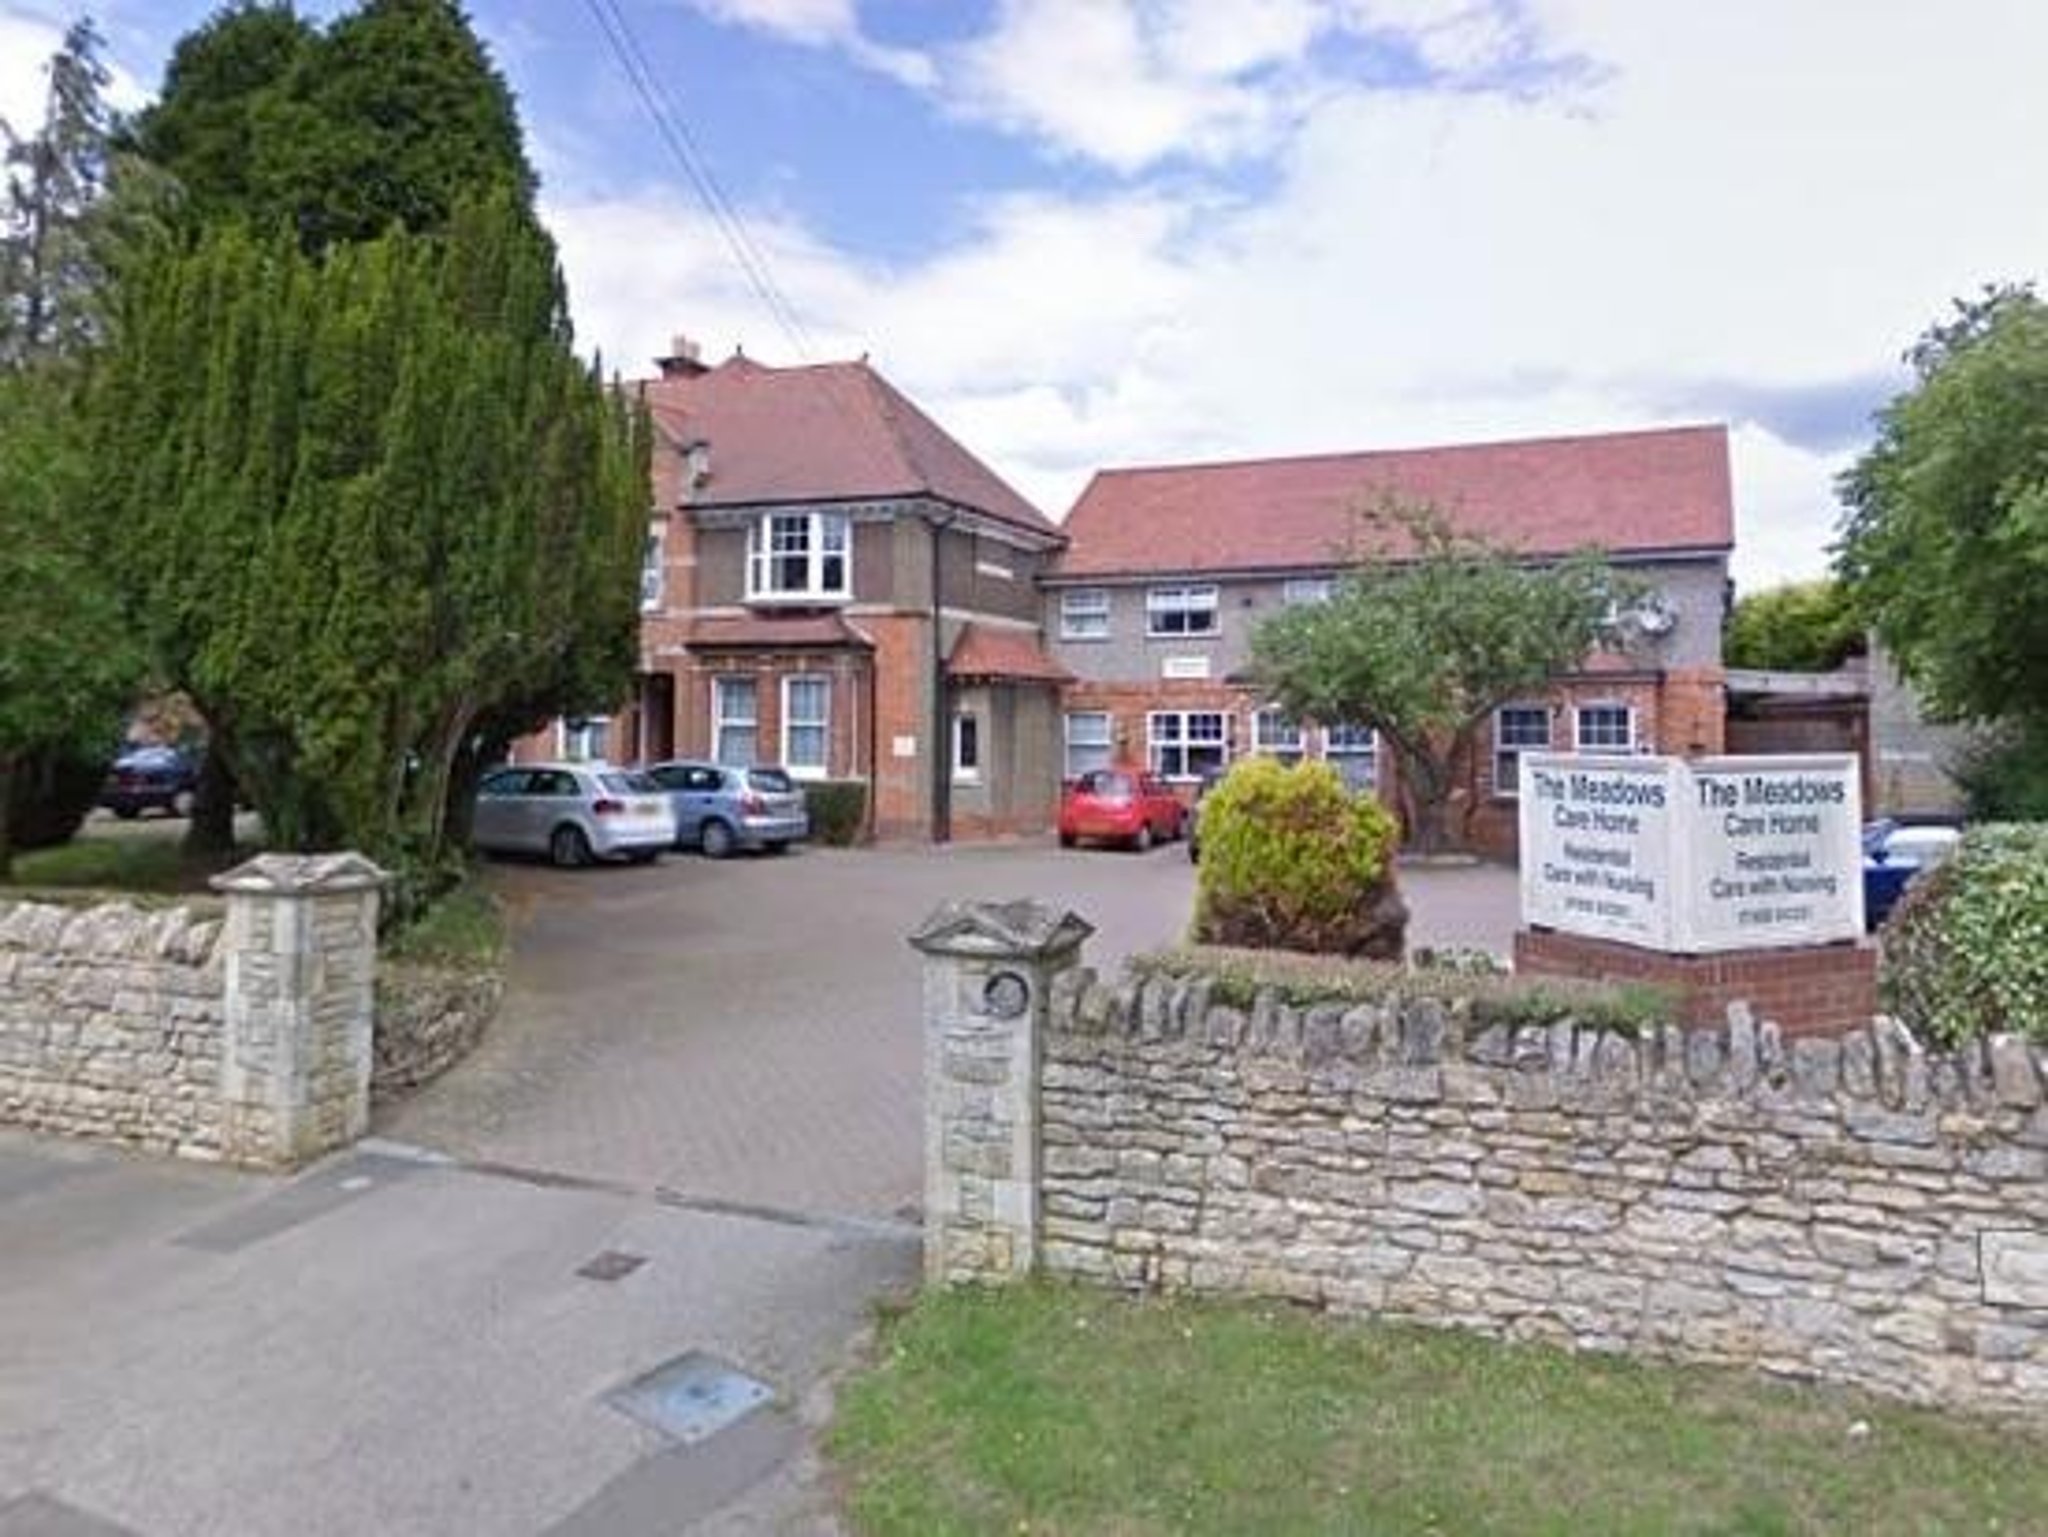 Rehab centre in South Northamptonshire closed down by council due to breaches in planning law